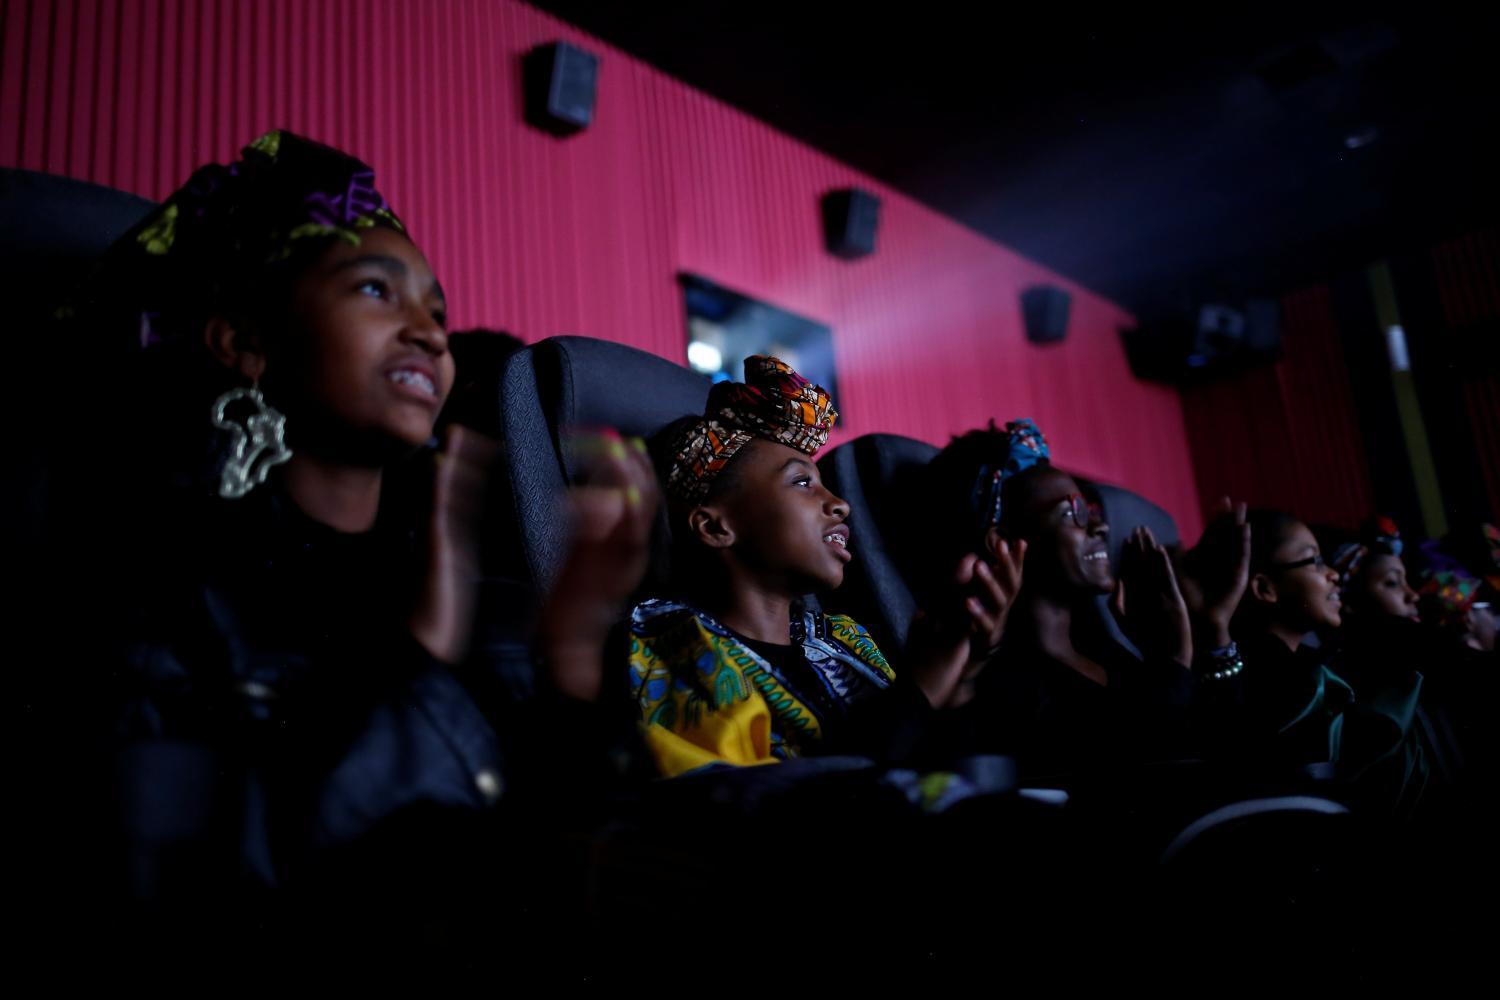 Ron Clark Academy 6th graders applaud during a scene in the film "Black Panther" at Atlantic Station theaters in Atlanta, Georgia, U.S., February 21, 2018. REUTERS/Chris Aluka Berry - RC143EE87A40